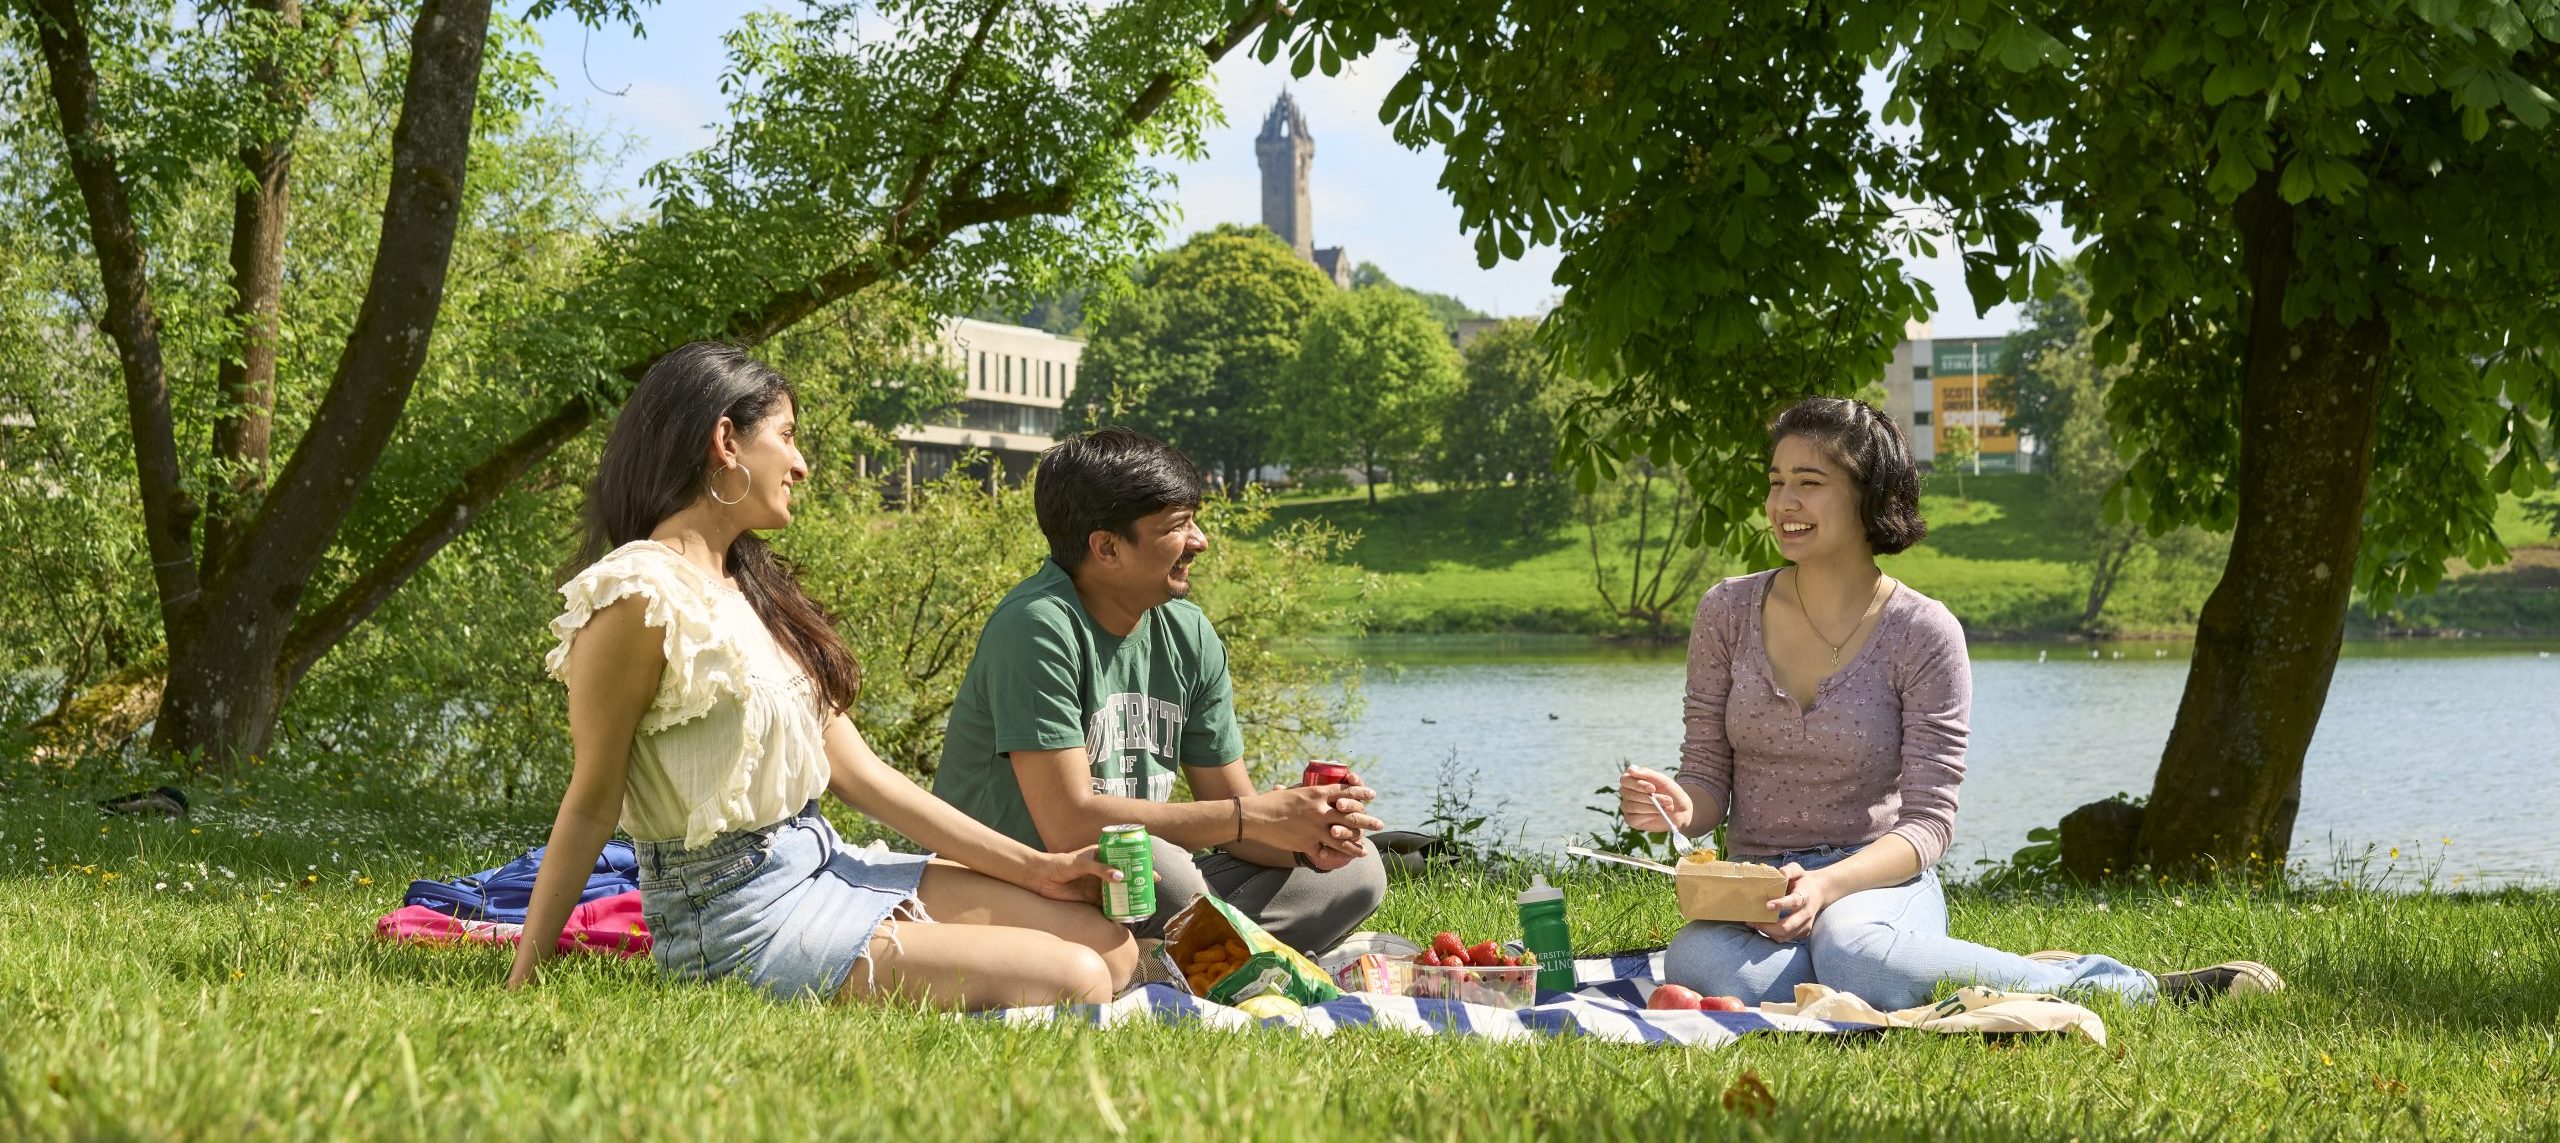 Students relaxing on the grass, having a picnic with Airthrey Loch and Wallace monument in the background.